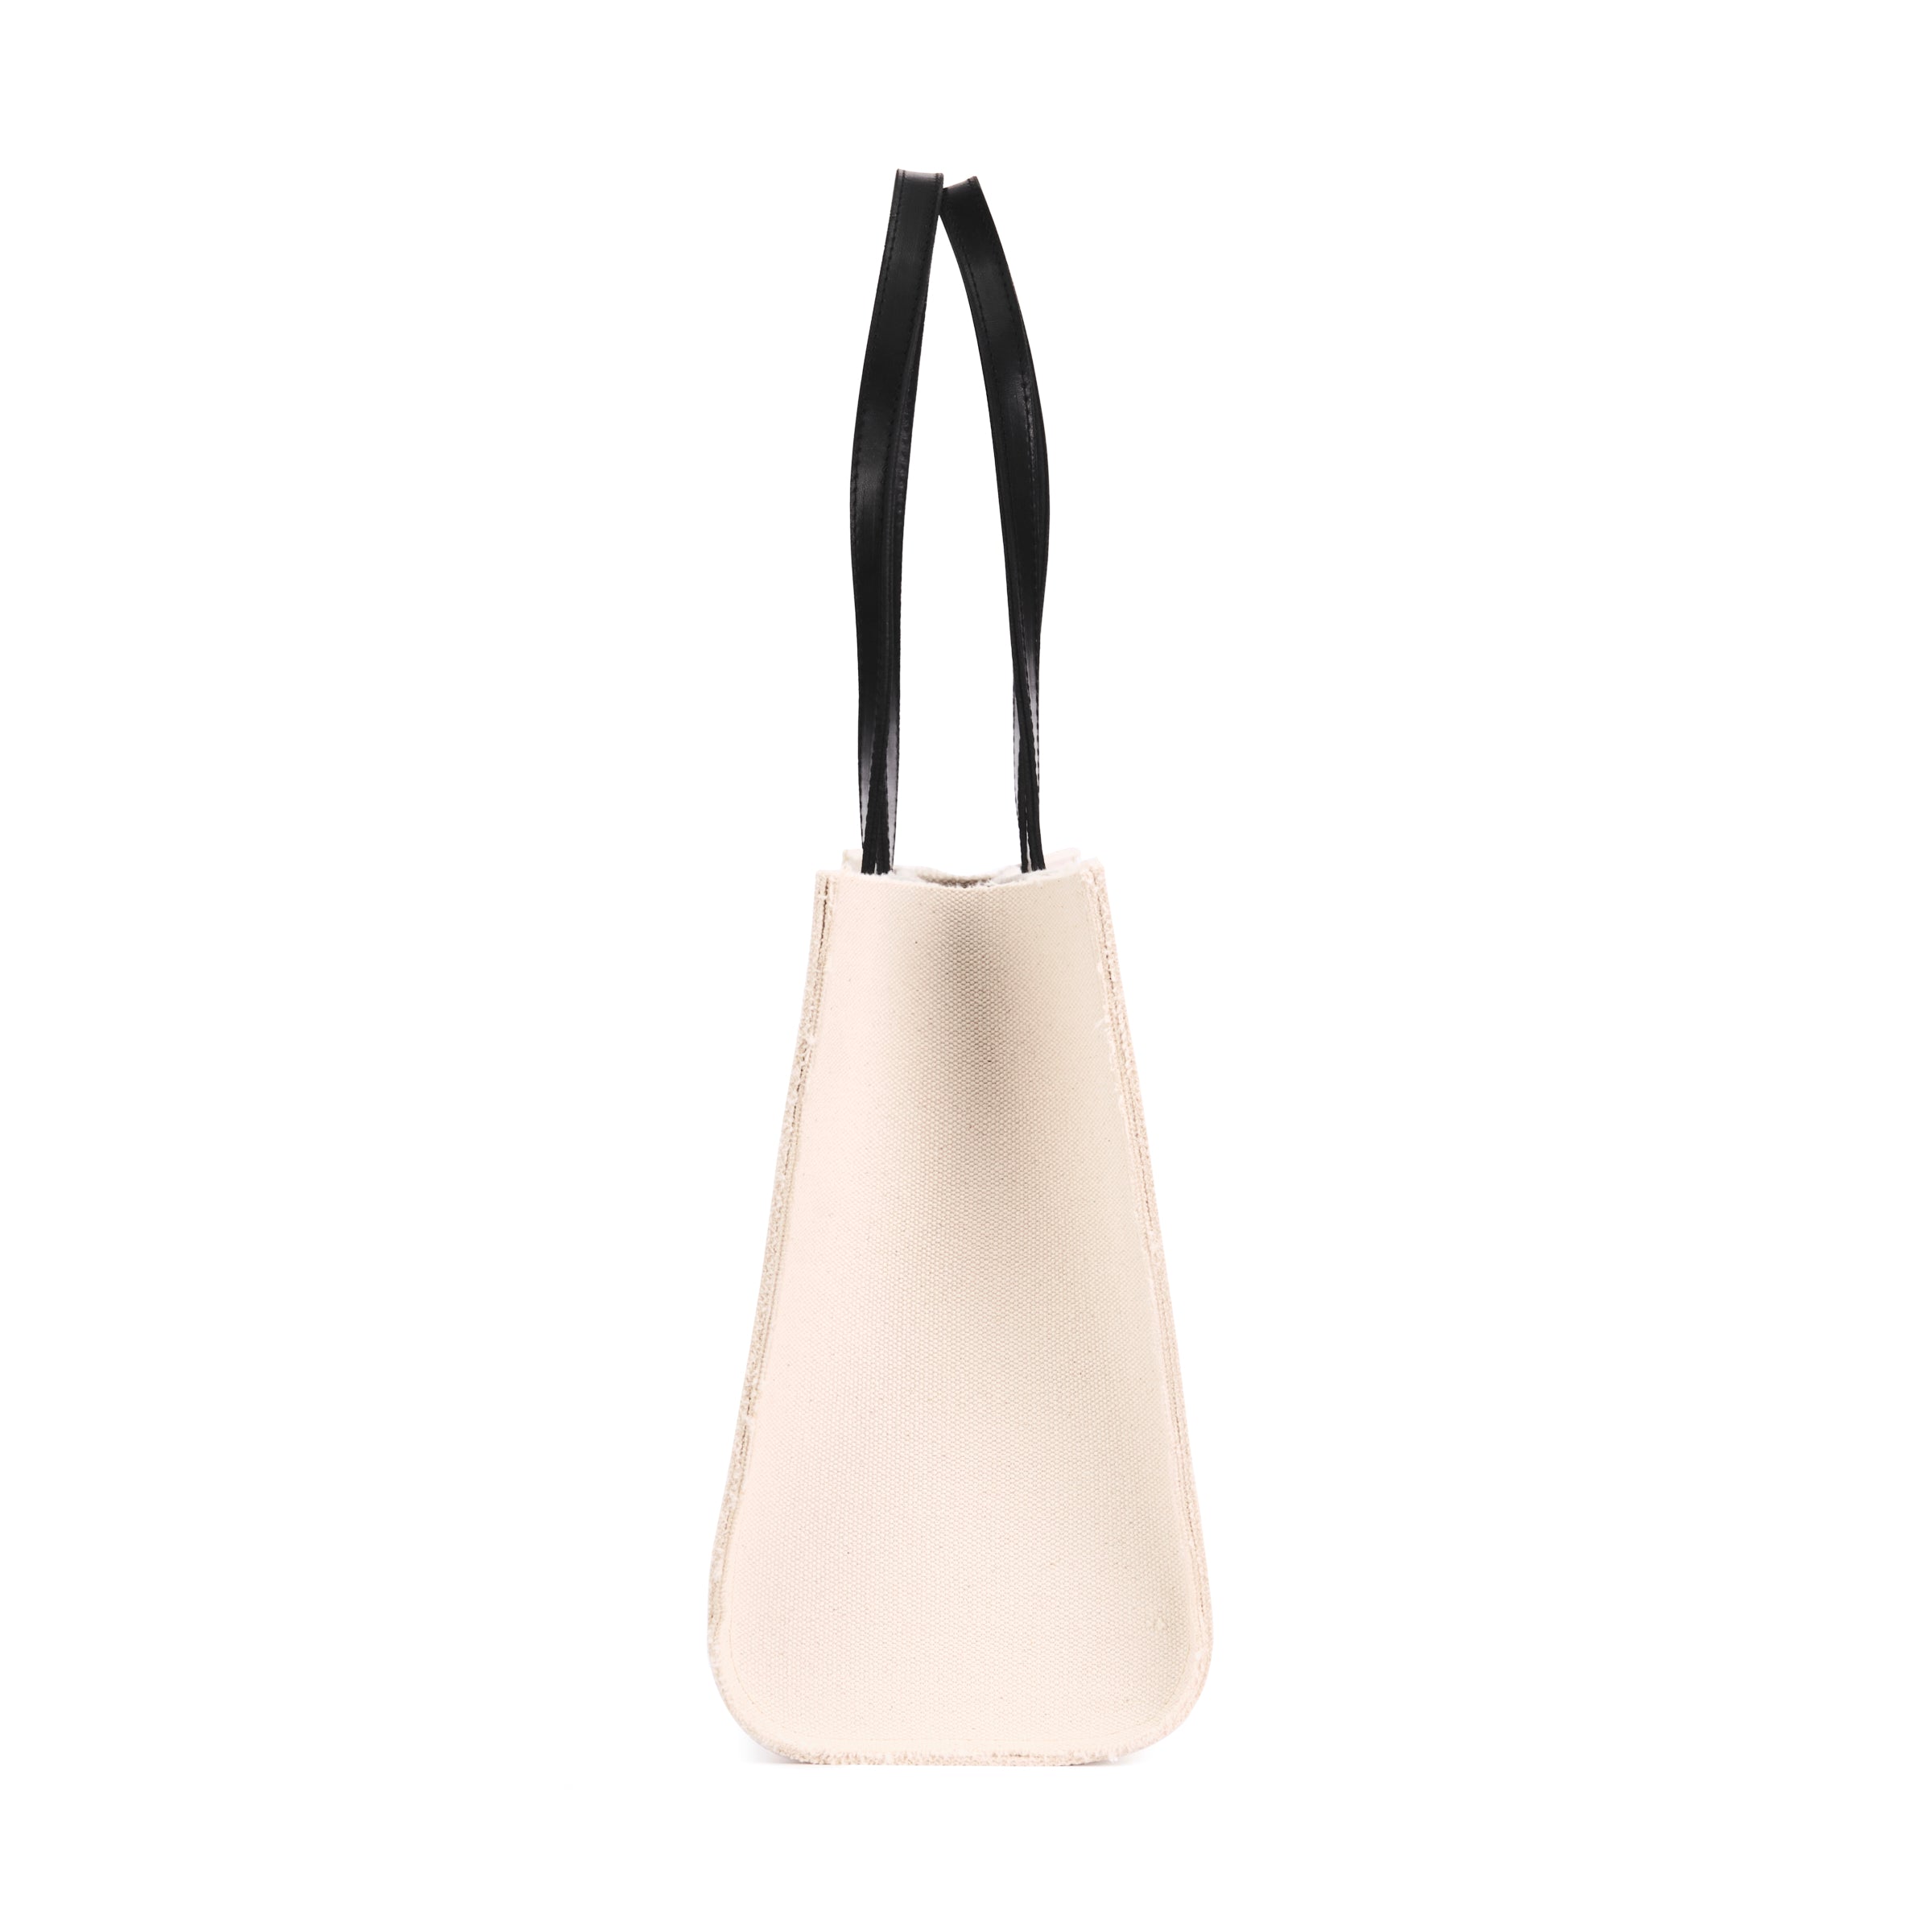 A side view of the Ava Canvas Tote in Black by Ezra Arthur